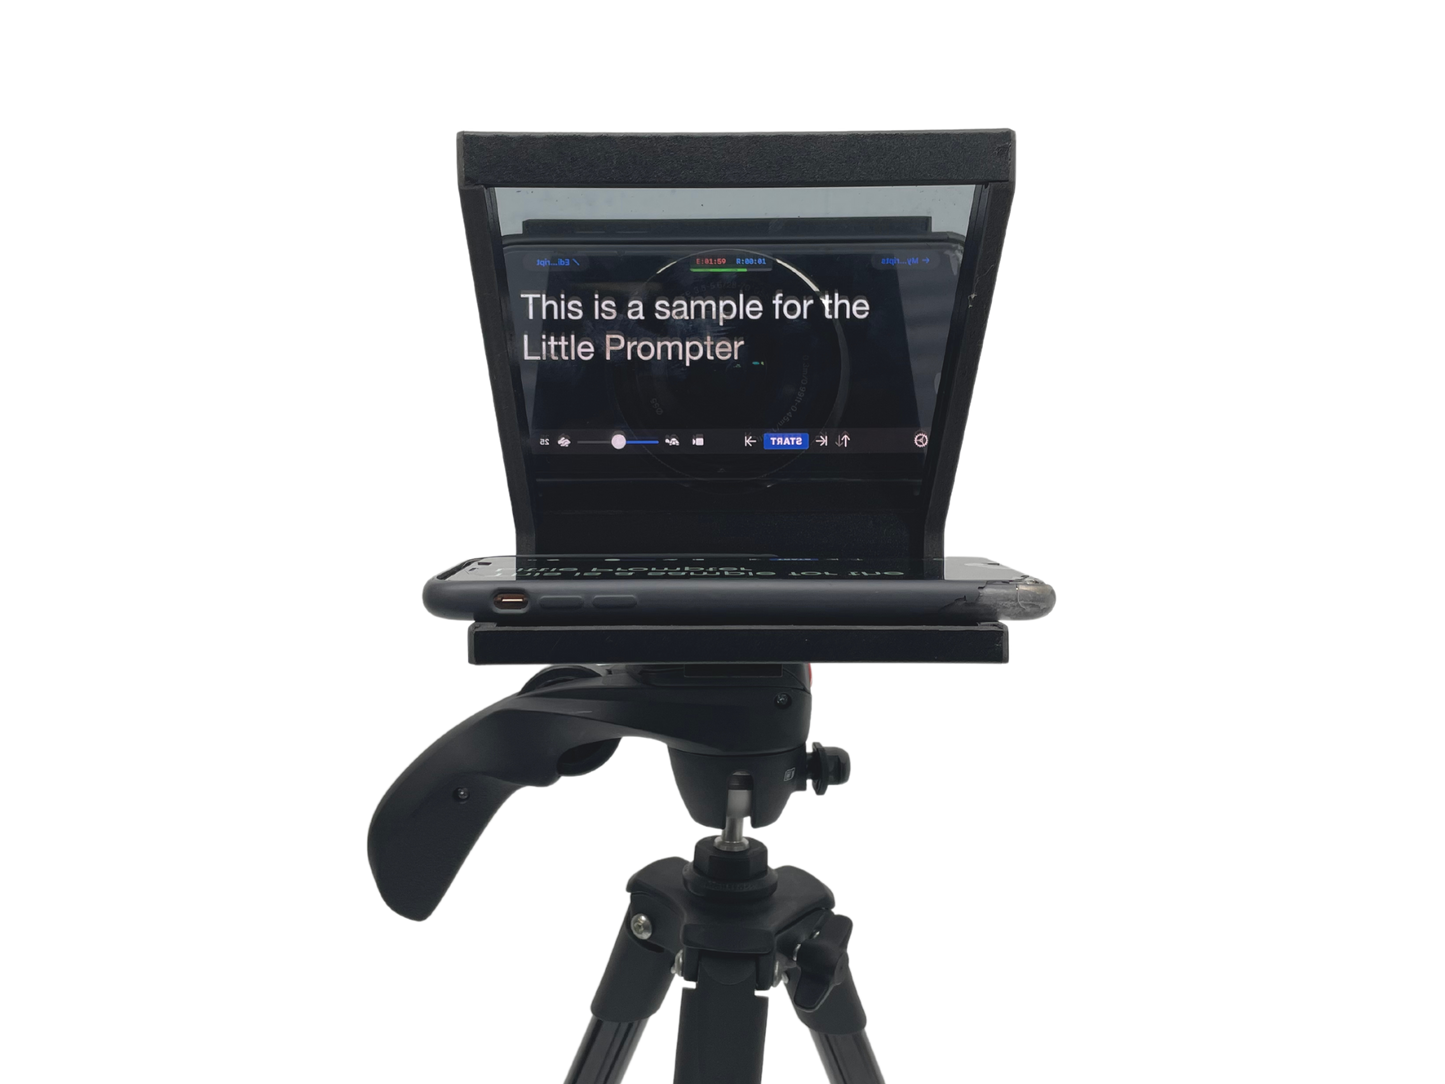 The Little Prompter